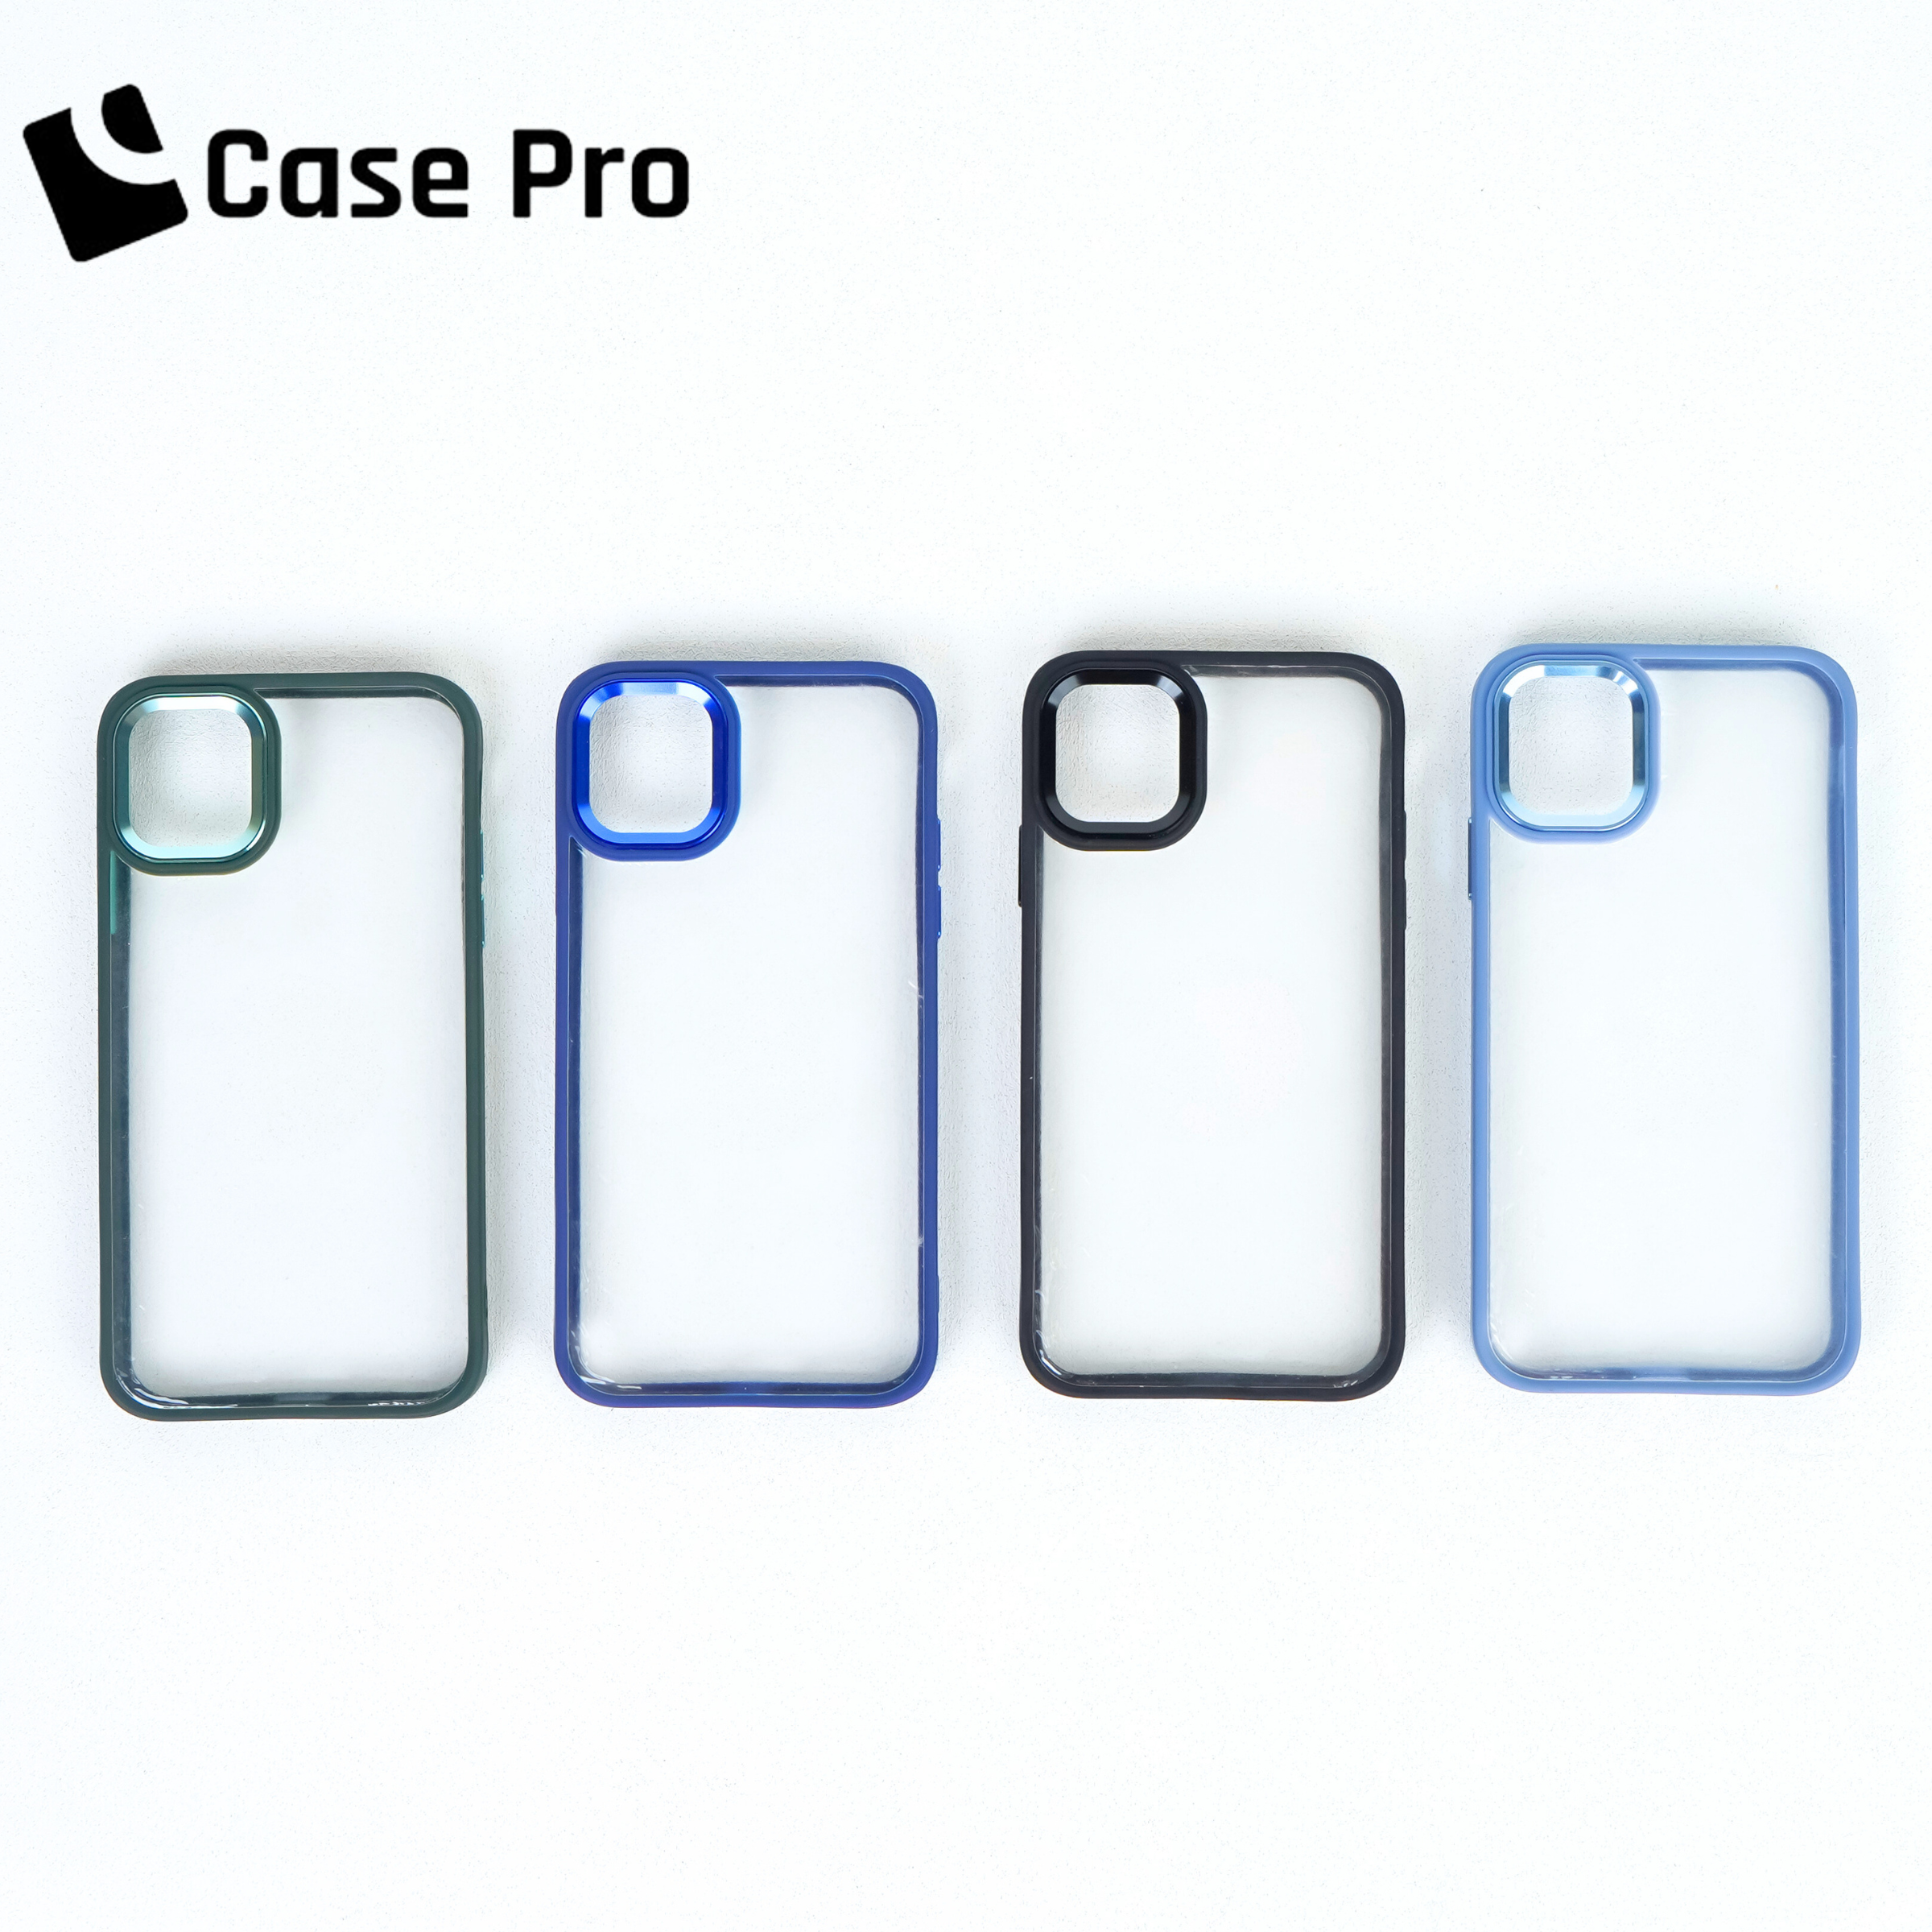 Crystal Series iPhone 11 Pro Max Case